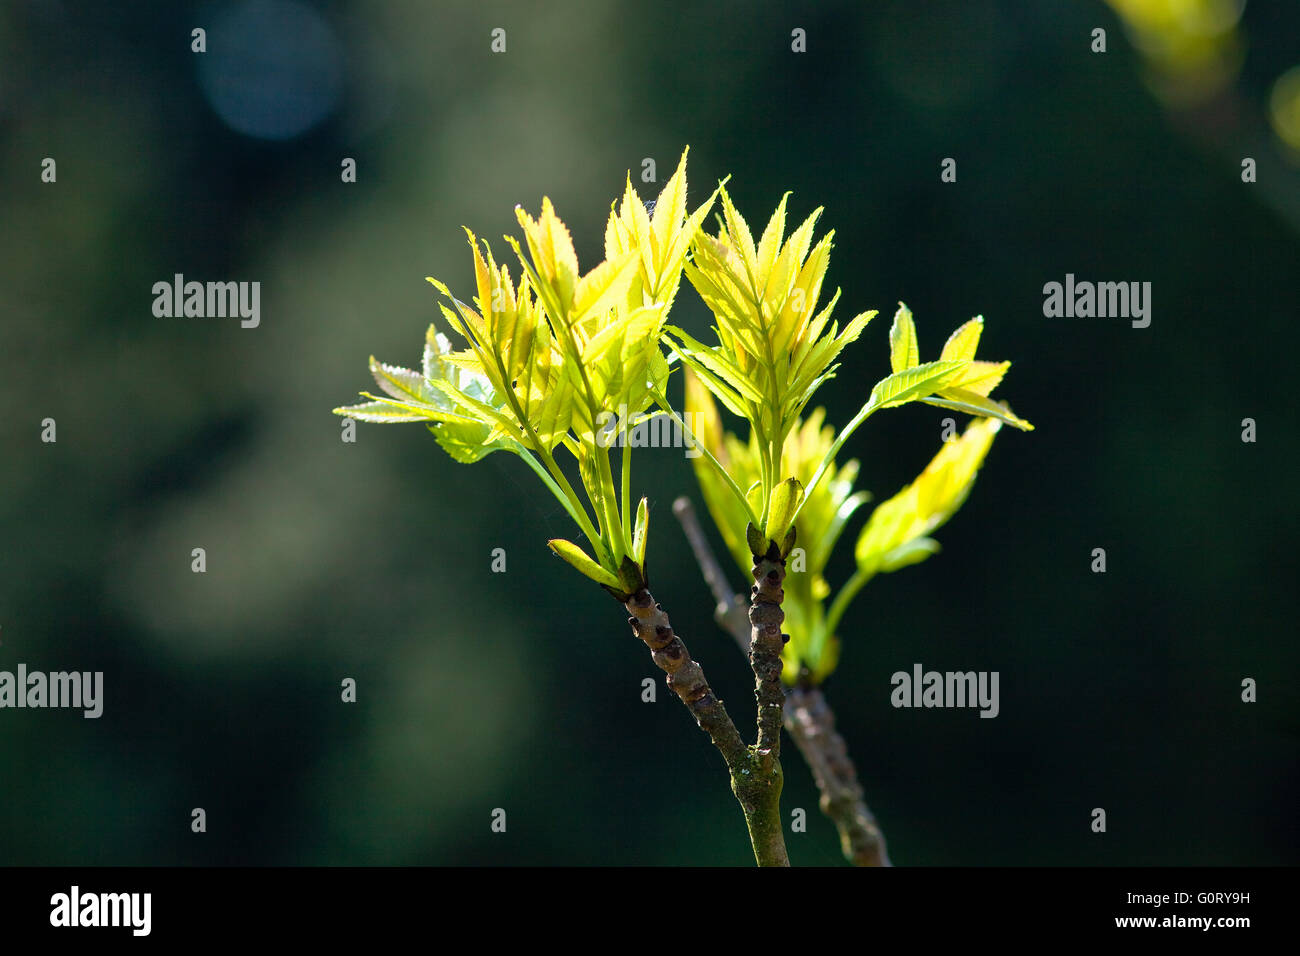 Closeup of a Tree Growing in Spring Stock Photo